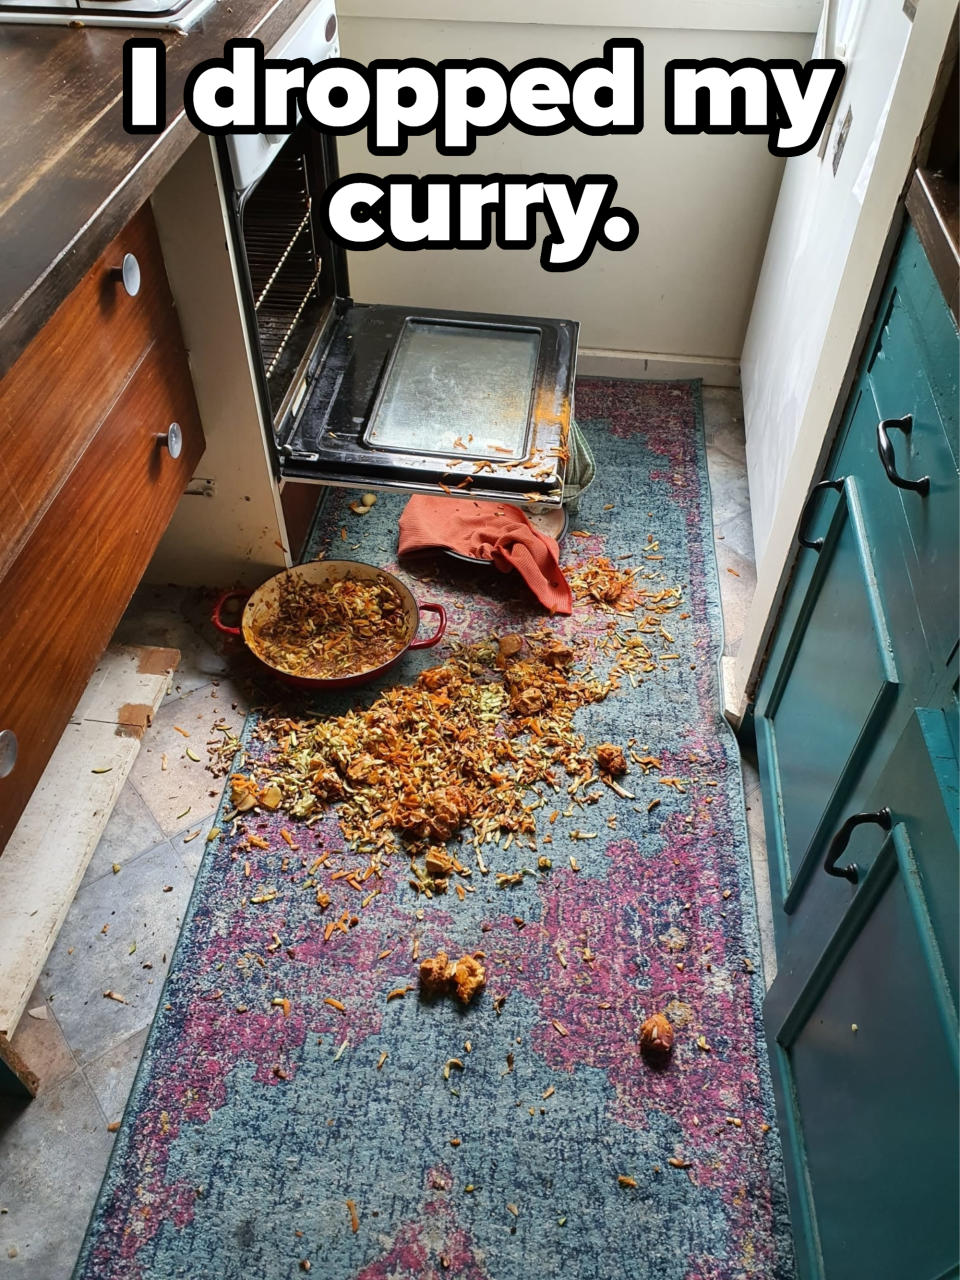 "I dropped my curry."